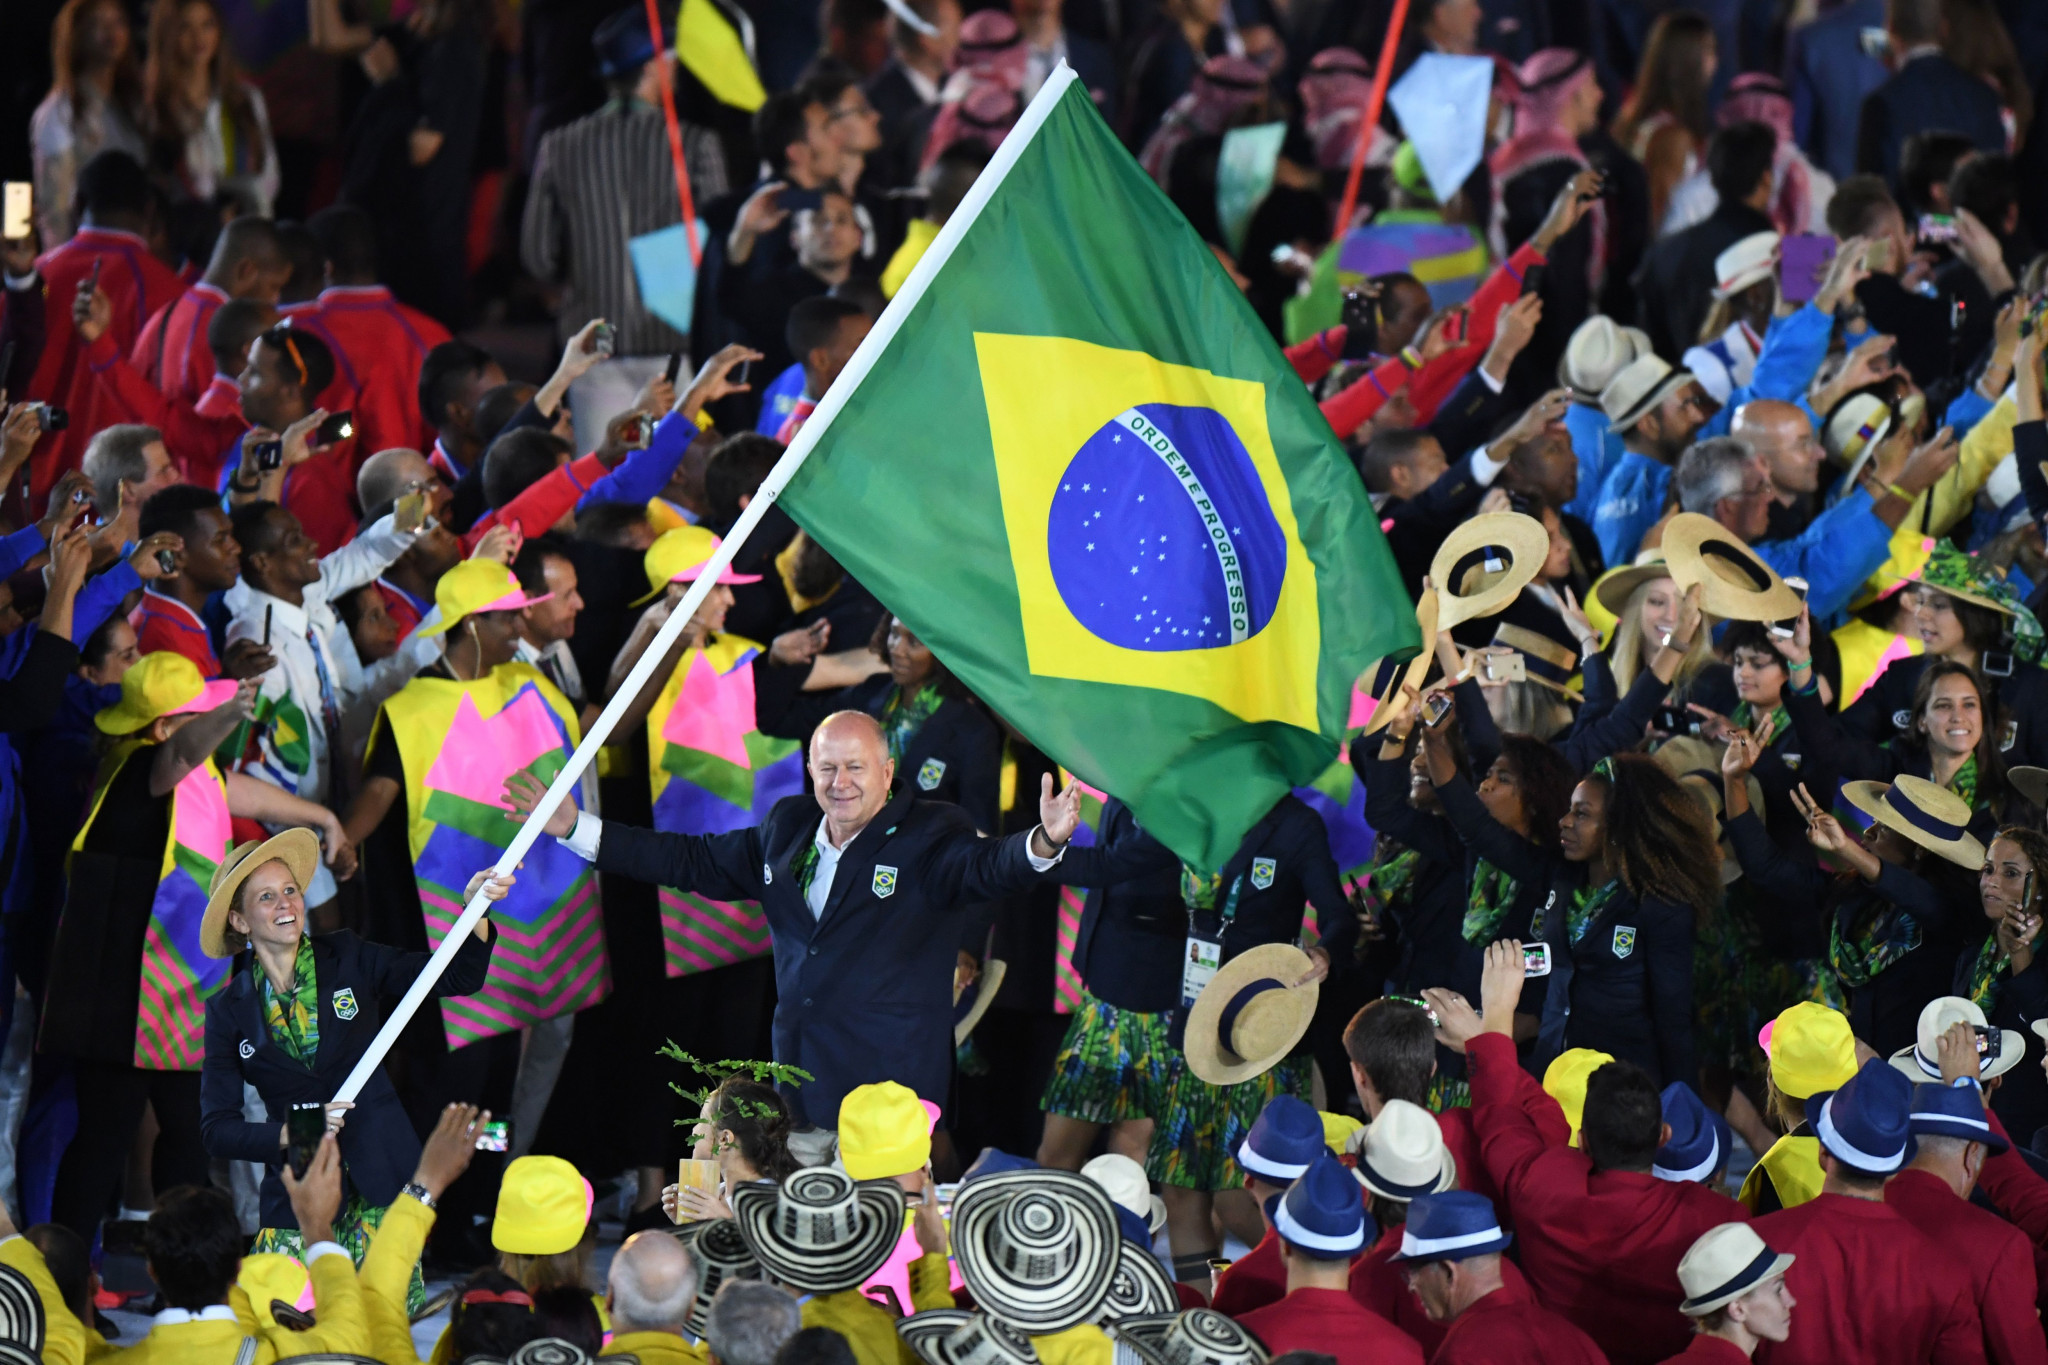 Brazilian athletes should still be able to march and compete under their own flag at Pyeongchang 2018 ©Getty Images